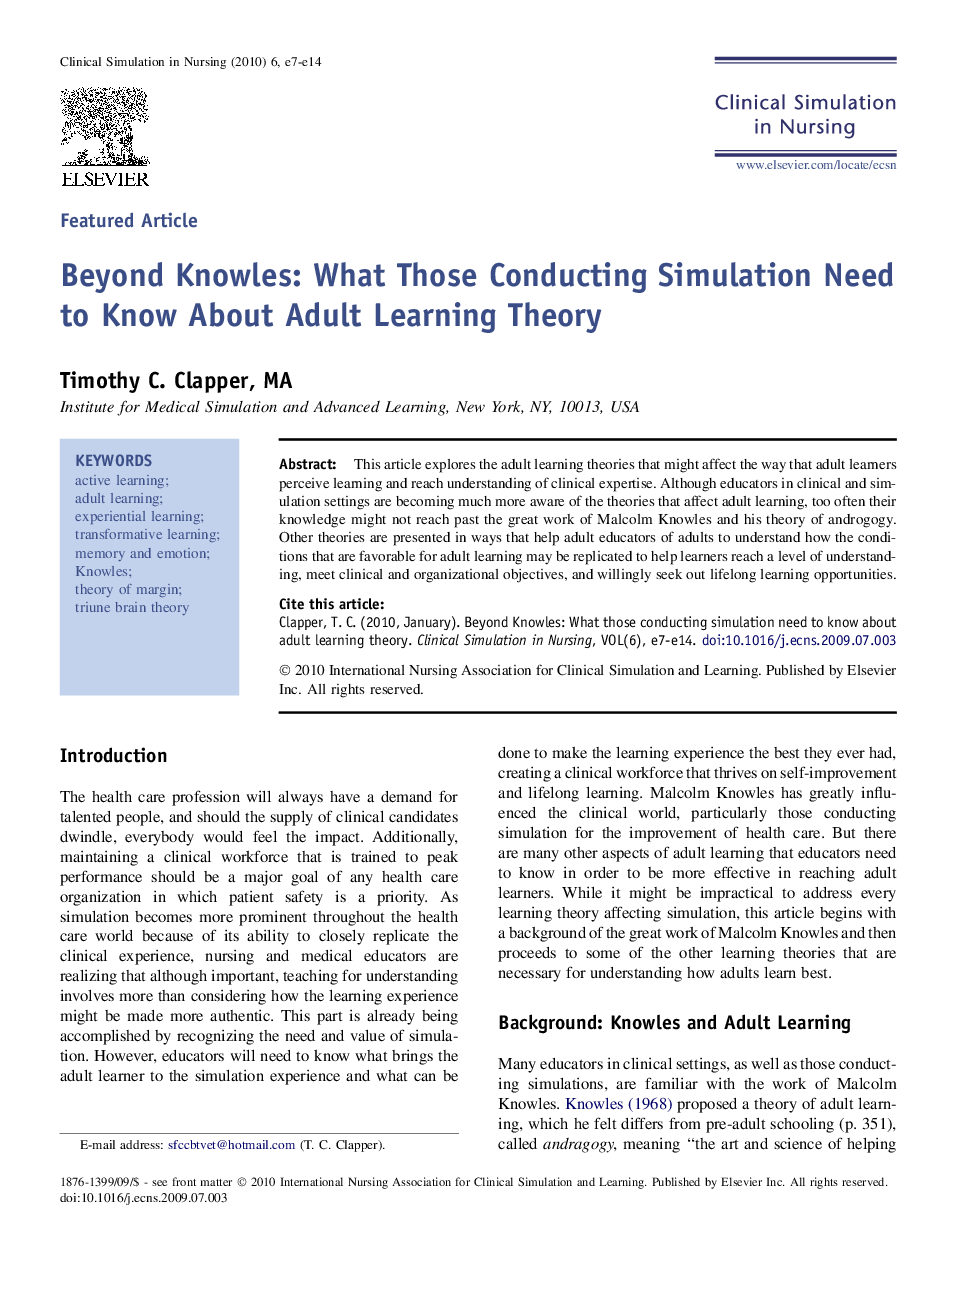 Beyond Knowles: What Those Conducting Simulation Need to Know About Adult Learning Theory 